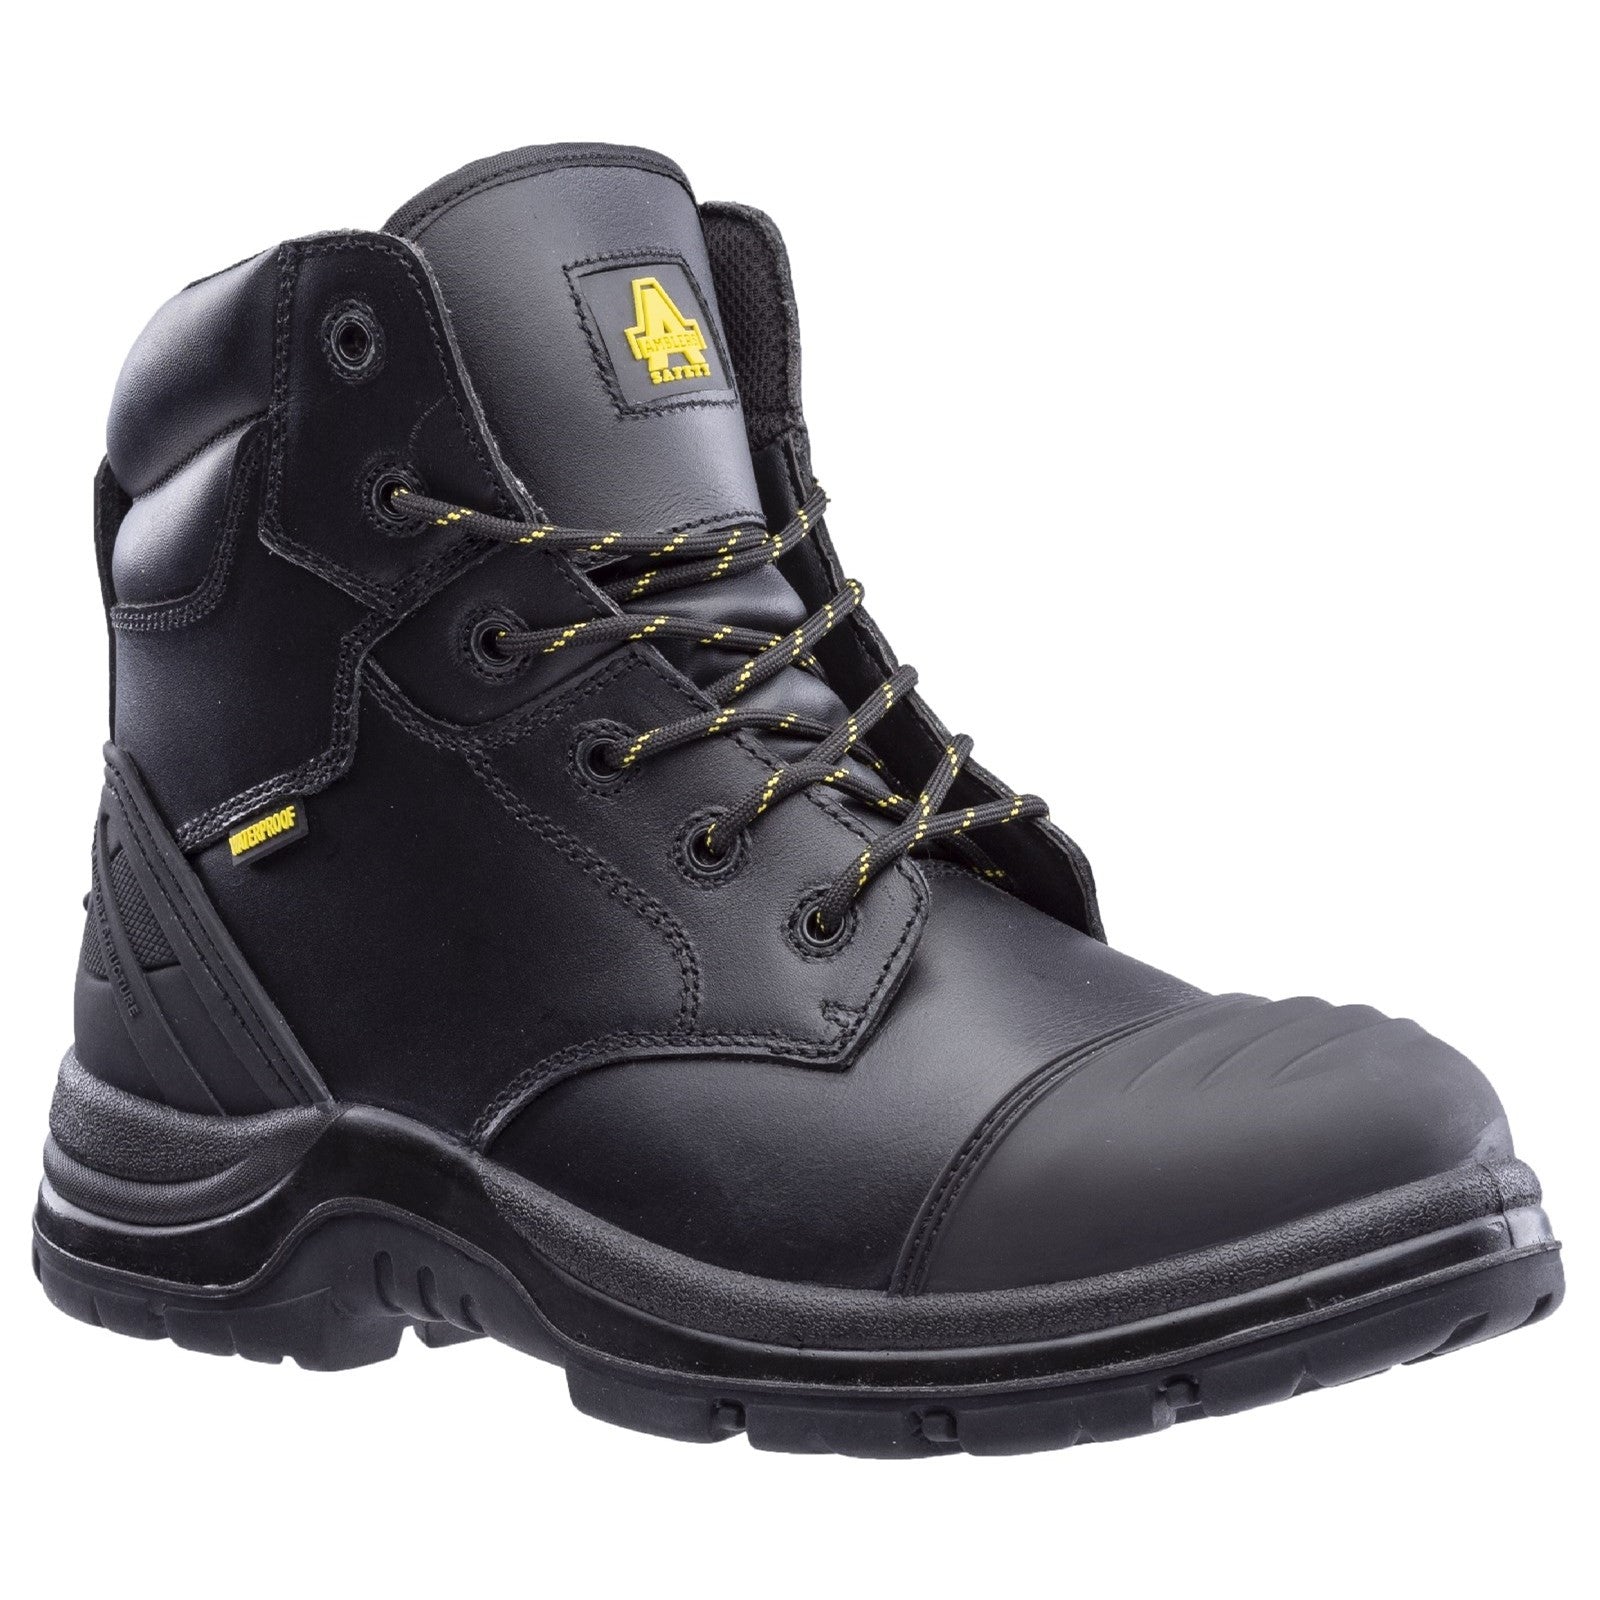 Amblers AS305C Winsford Safety Boot